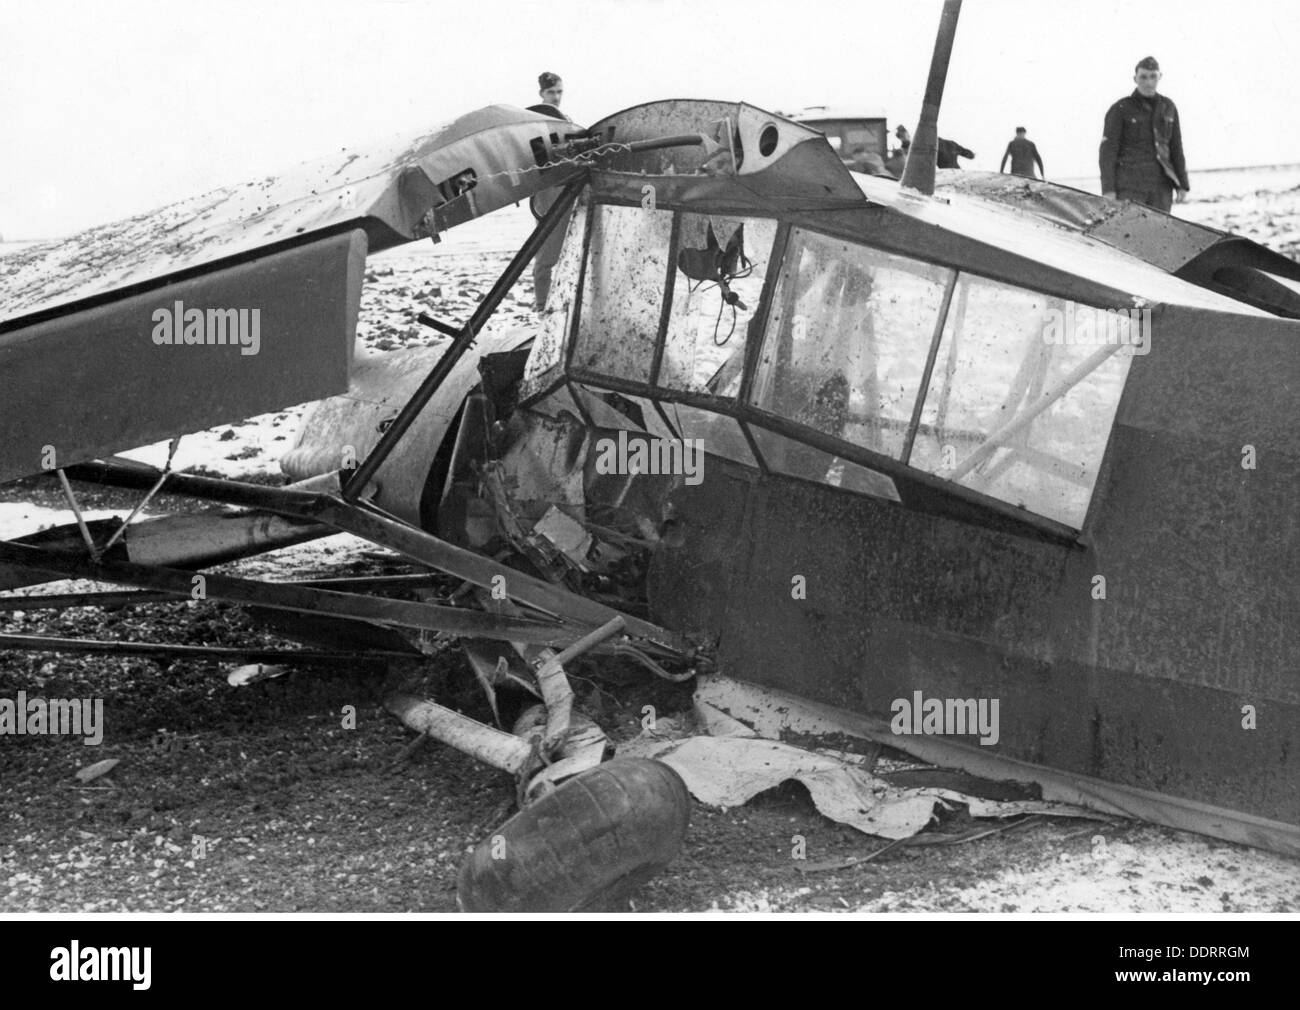 Second World War / WWII, aerial warfare, France, crashed German liaison aircraft type Fieseler Fi 156 'Storch', near Amiens, 23.2.1941, Additional-Rights-Clearences-Not Available Stock Photo